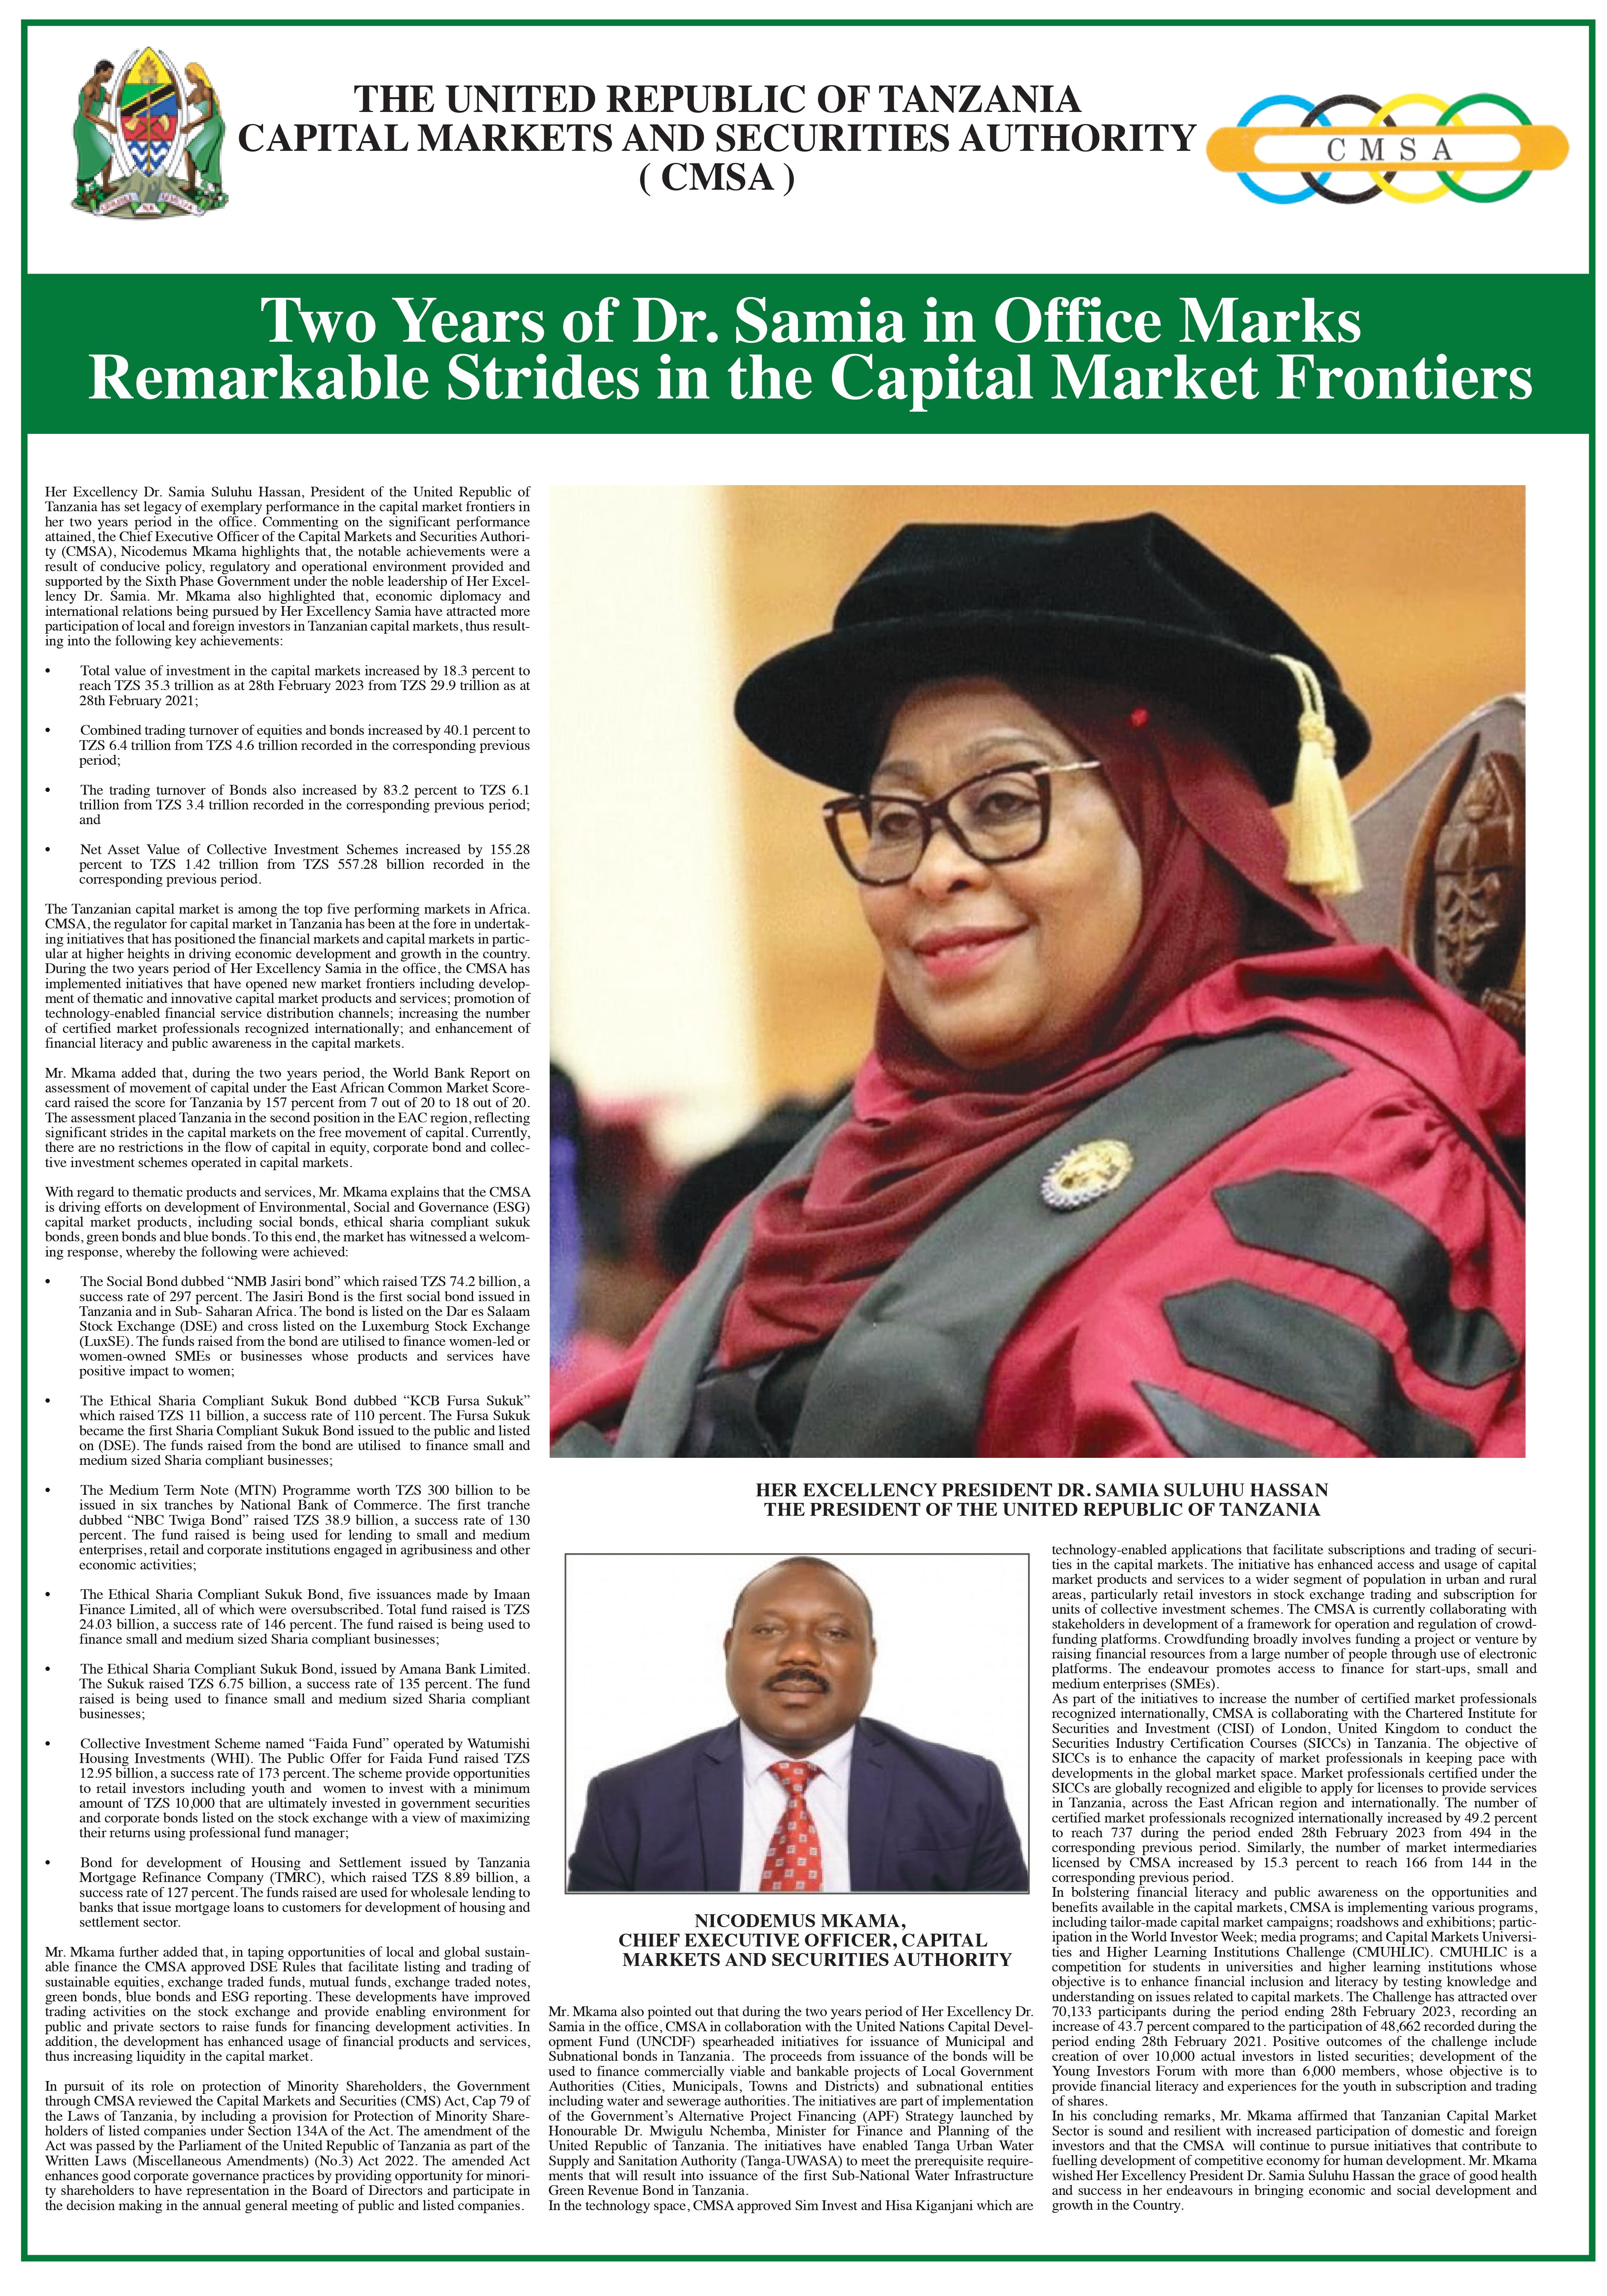 Two Years of Dr. Samia in Office Marks Remarkable Strides in the Capital Market Frontiers